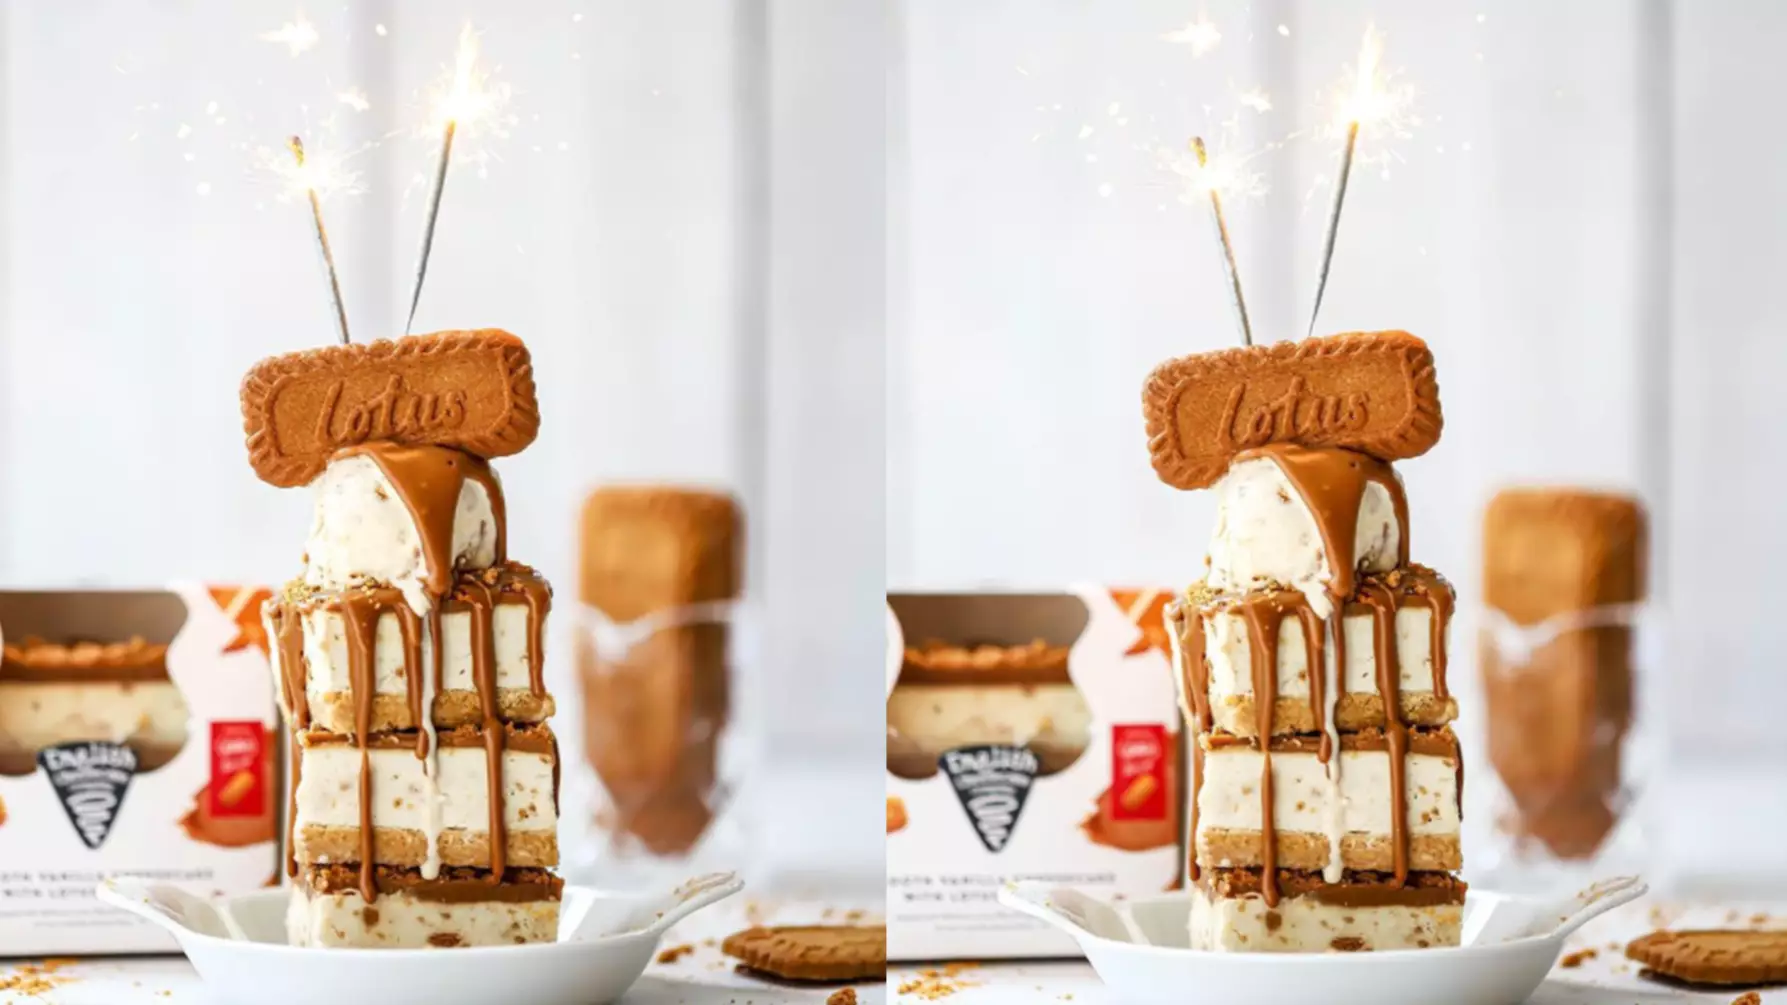 Lotus Biscoff Launches A Vegan Stacker Pack And It Looks Insane